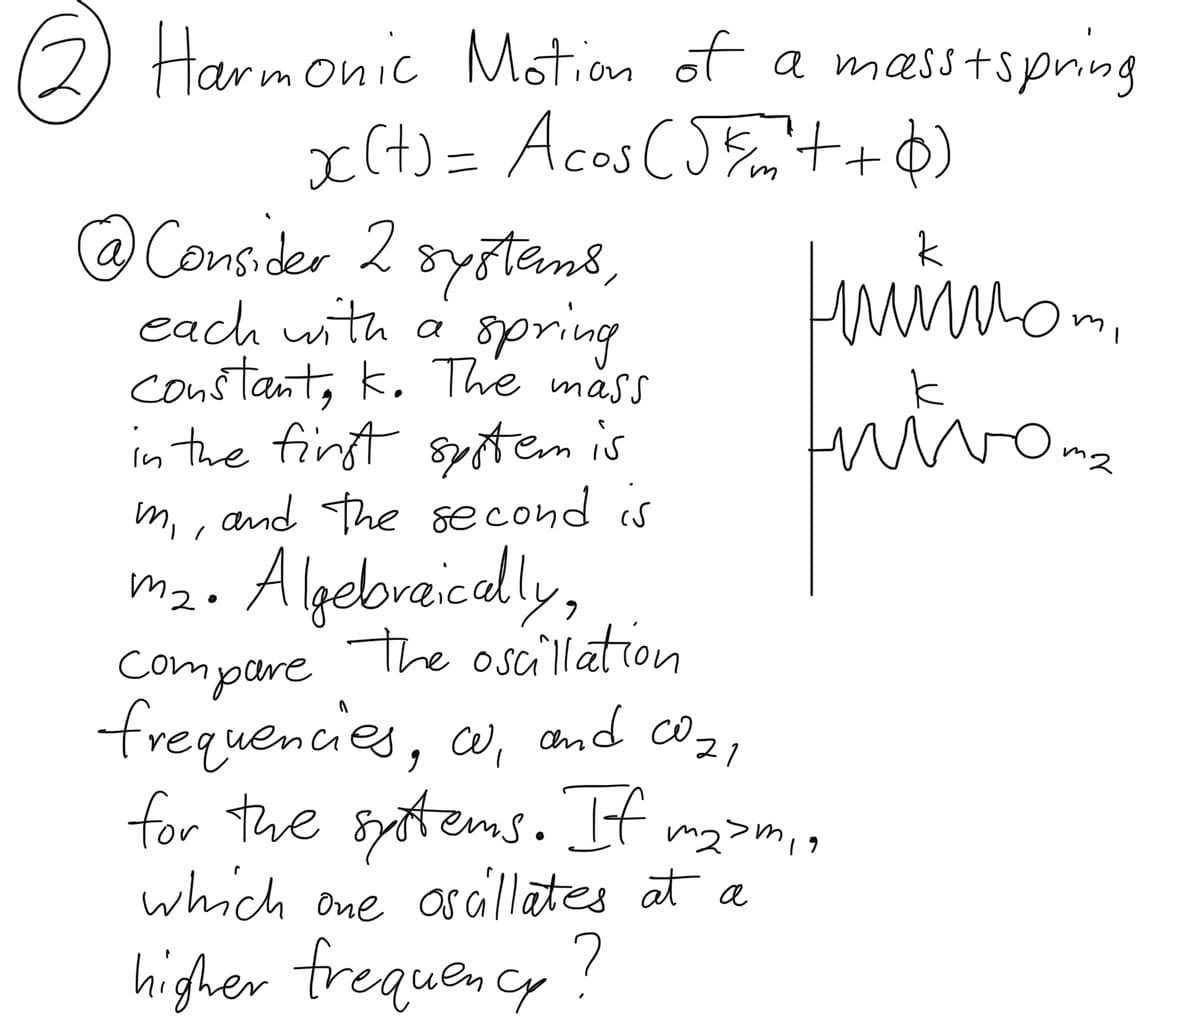 2) Harmonic Motion of a masstspring
x(+) = Acos (55m²++6)
@ Consider 2 systems,
each with a spring
constant, K. The mass
in the first system is
m,, and the second is
mi
m₂. Algebraically,
The oscillation
нийнот
mwo
compare
1
frequencies, w, and coz,
for the systems. If m₂>m₁,
which one oscillates at a
higher frequency?
Oma